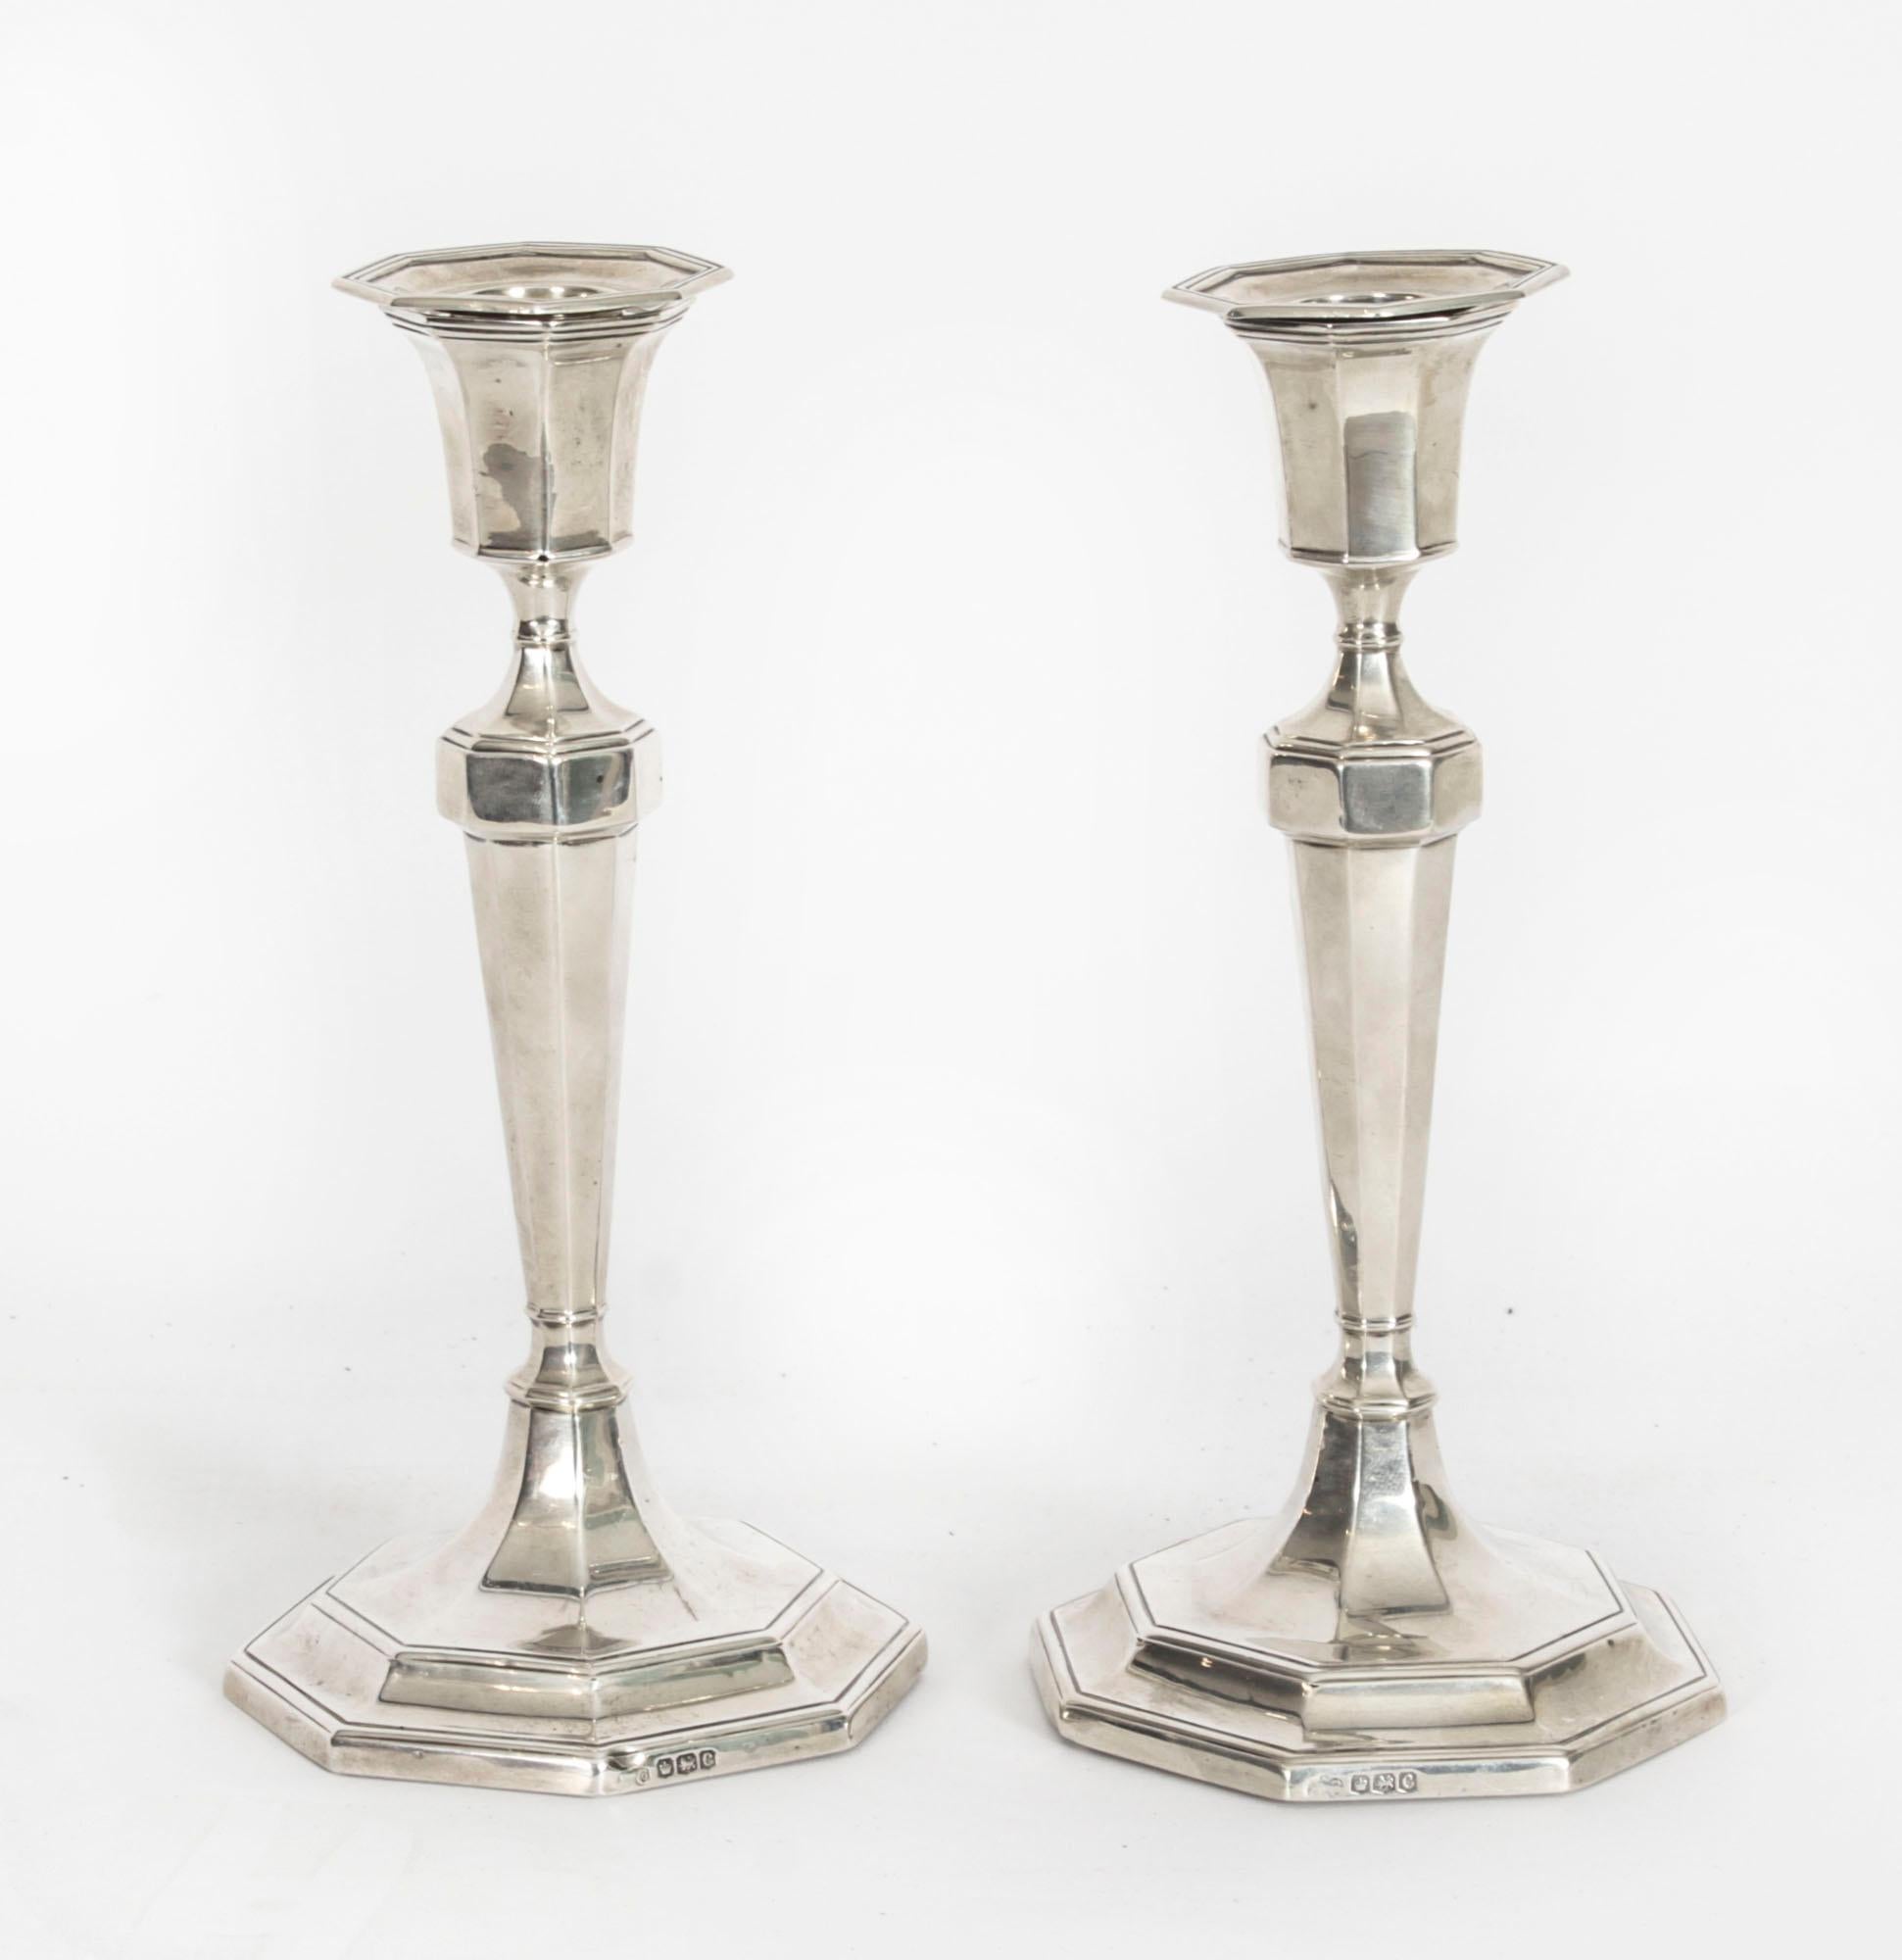 Antique Pair Sterling Silver Candlesticks by Hawkesworth Eyre & Co 1920 Century 11